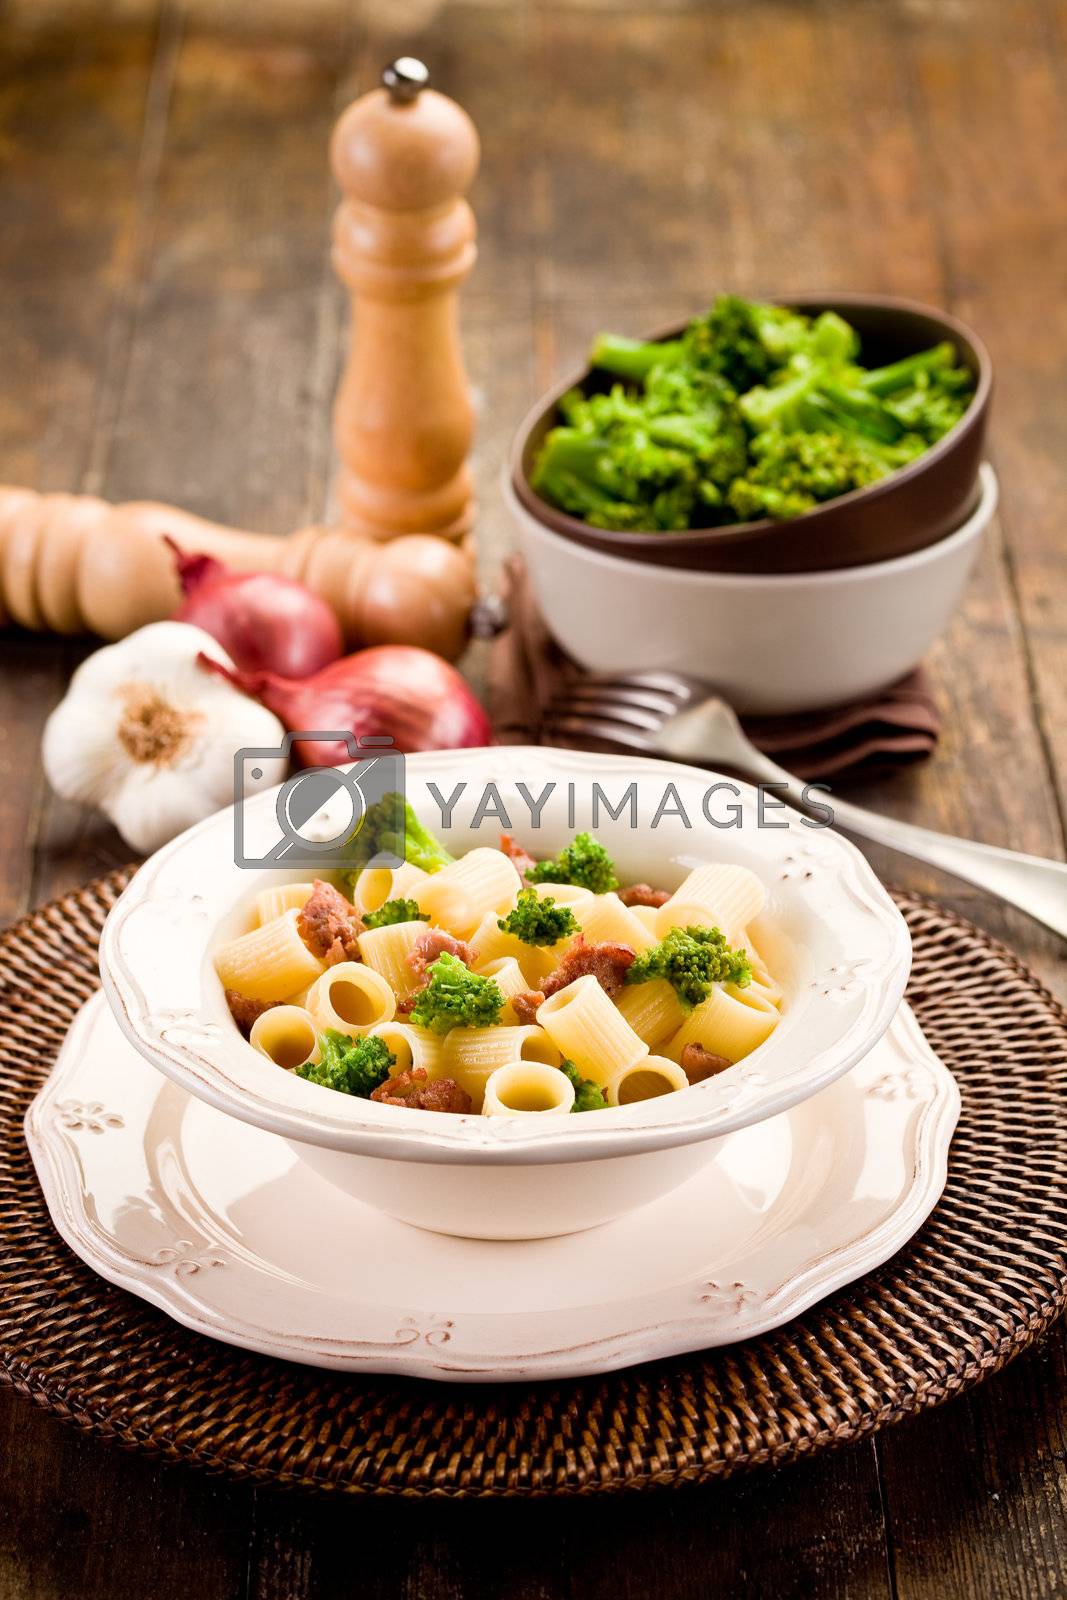 Royalty free image of Pasta with sausage and broccoli by genious2000de